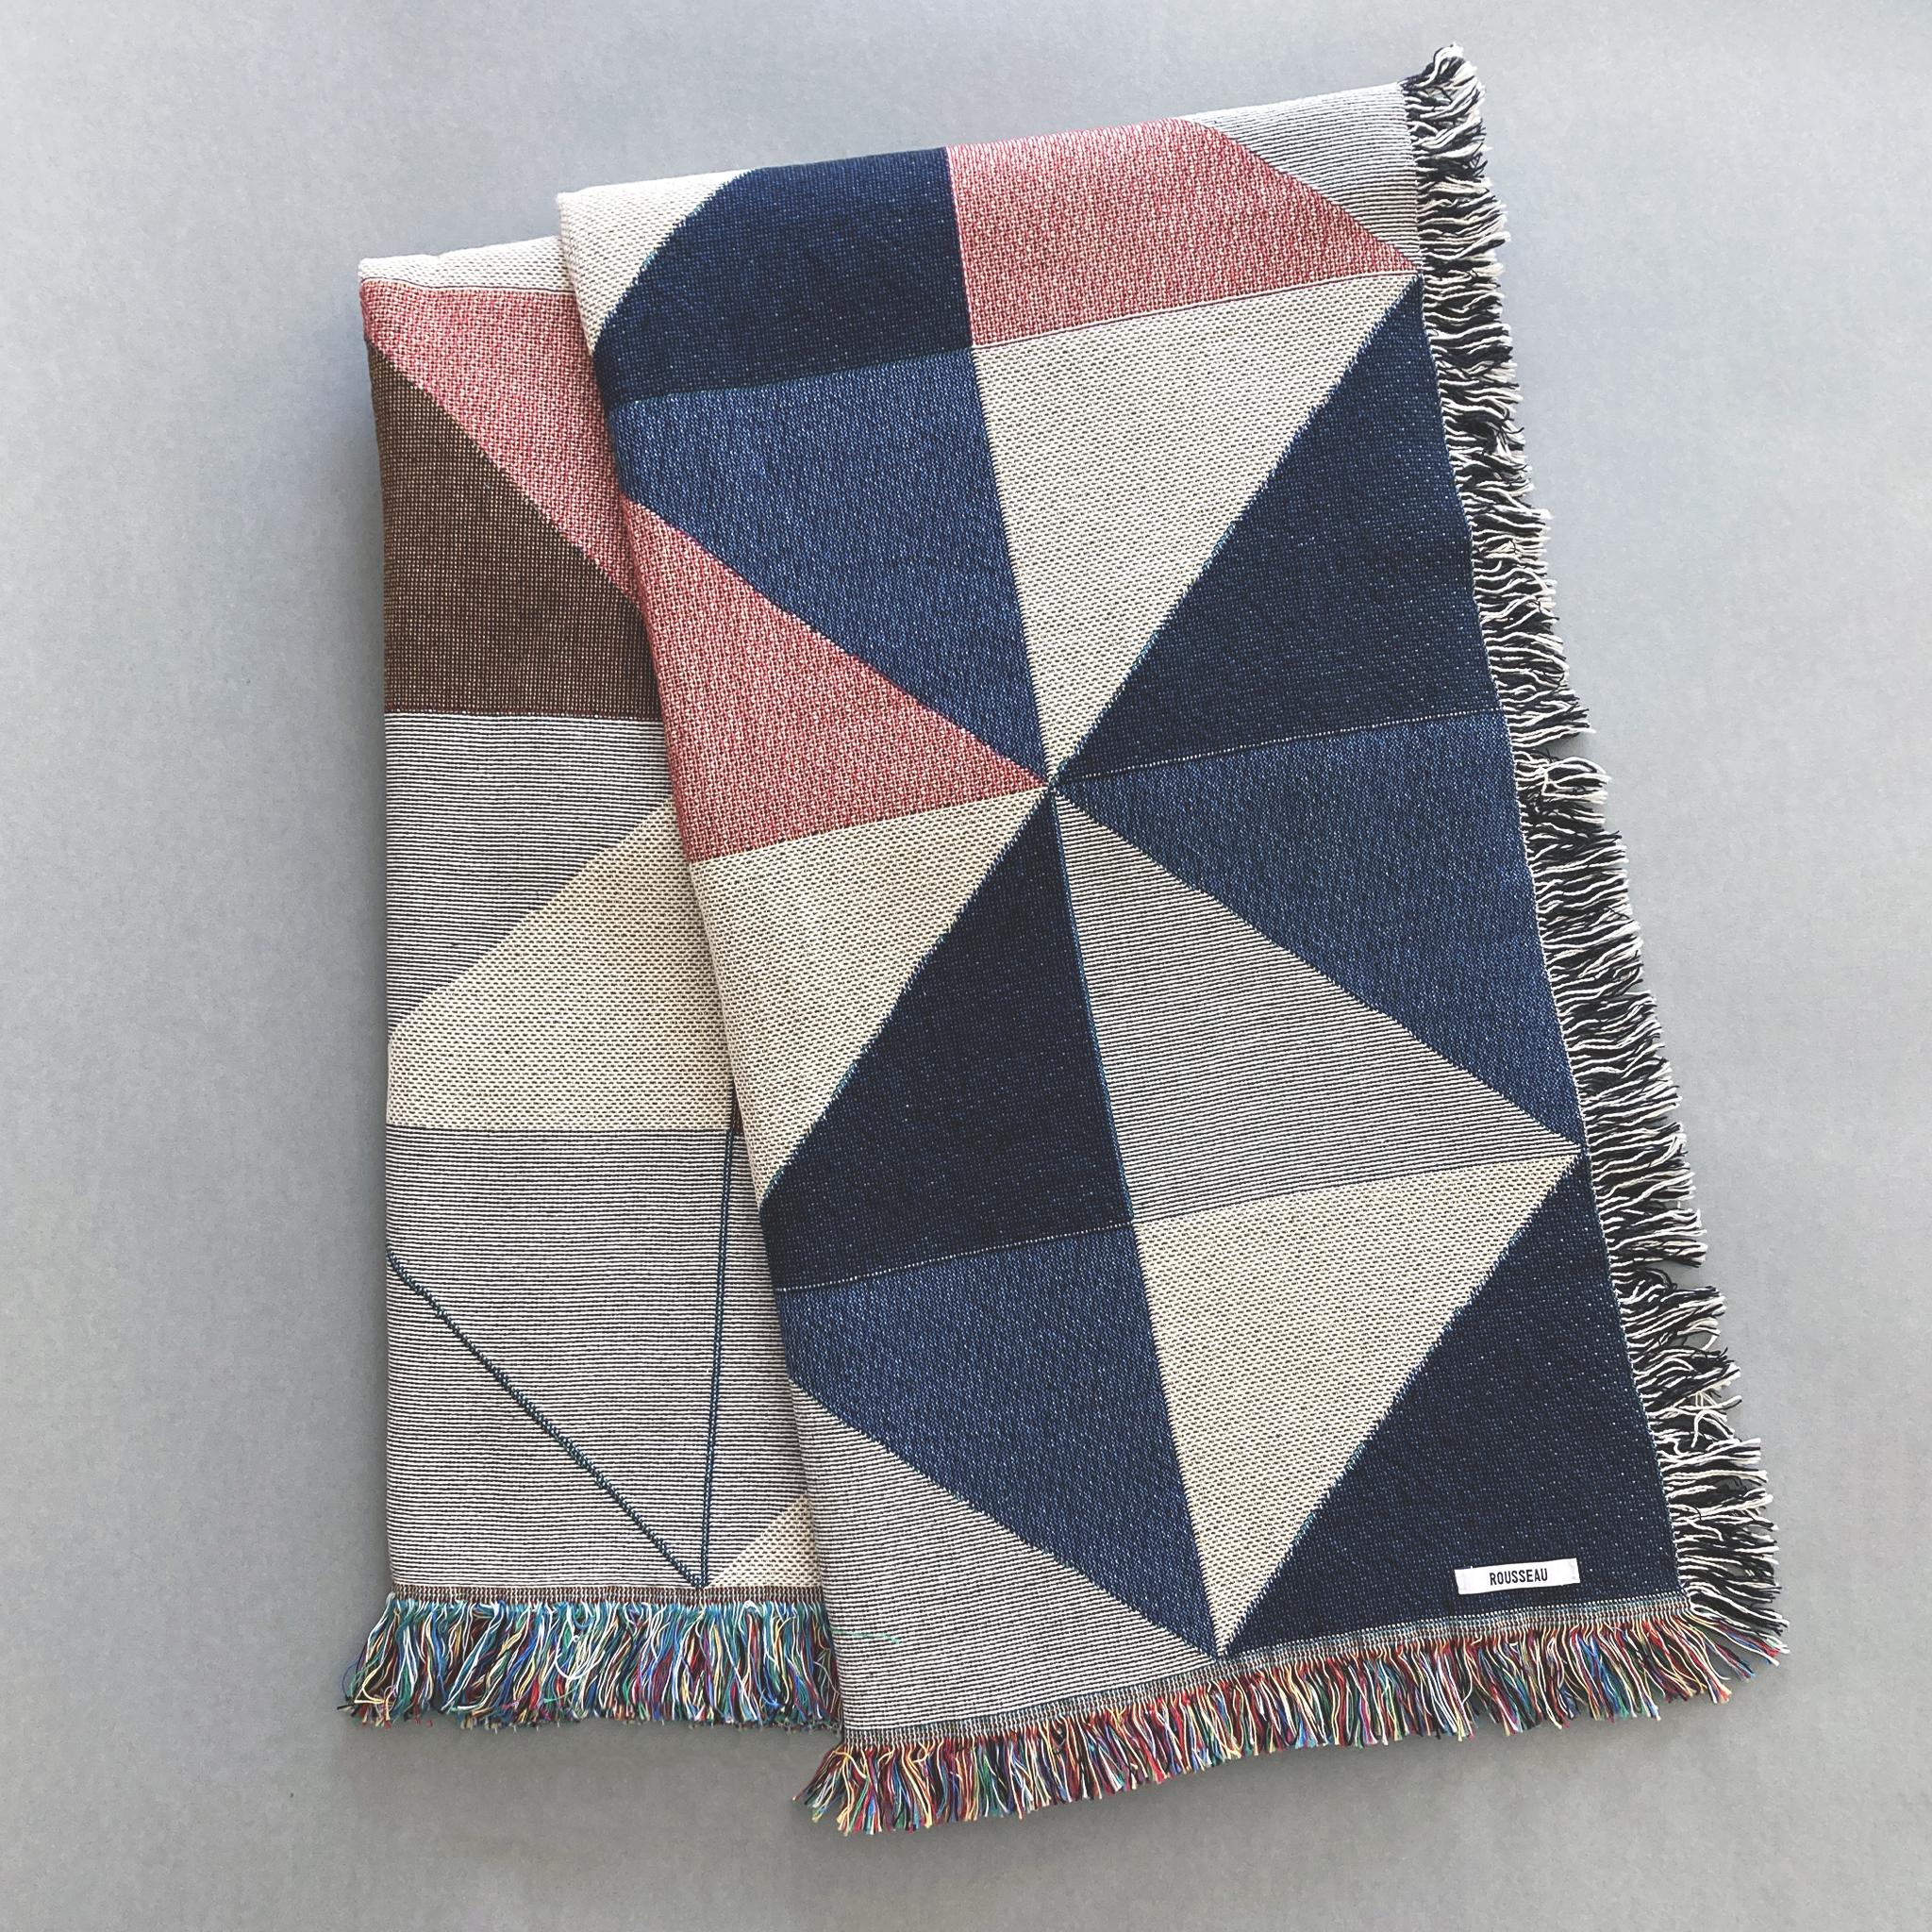 The Sixteen throw in navy, pink, ochre and gray geometric print woven throw with fringe edge. Woven with recycled cotton on a jacquard loom, made in the US. Each throw measures 54 x 72 inches.

This geometric patterned throw is inspired by a